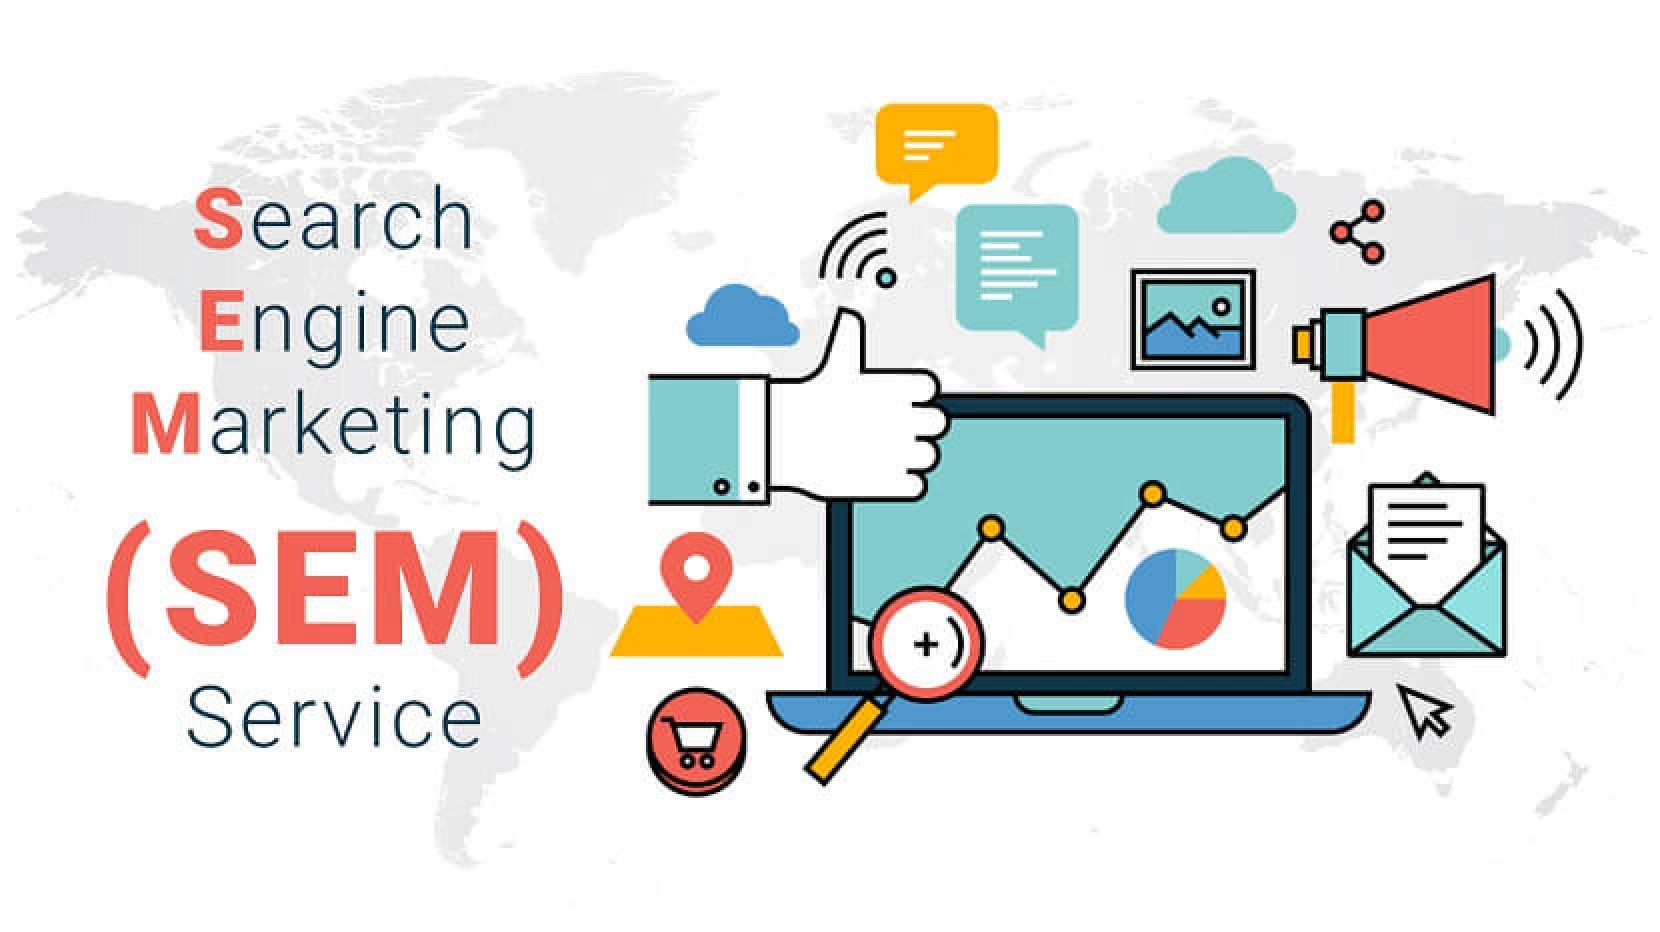 earch engine marketing Marketing Services